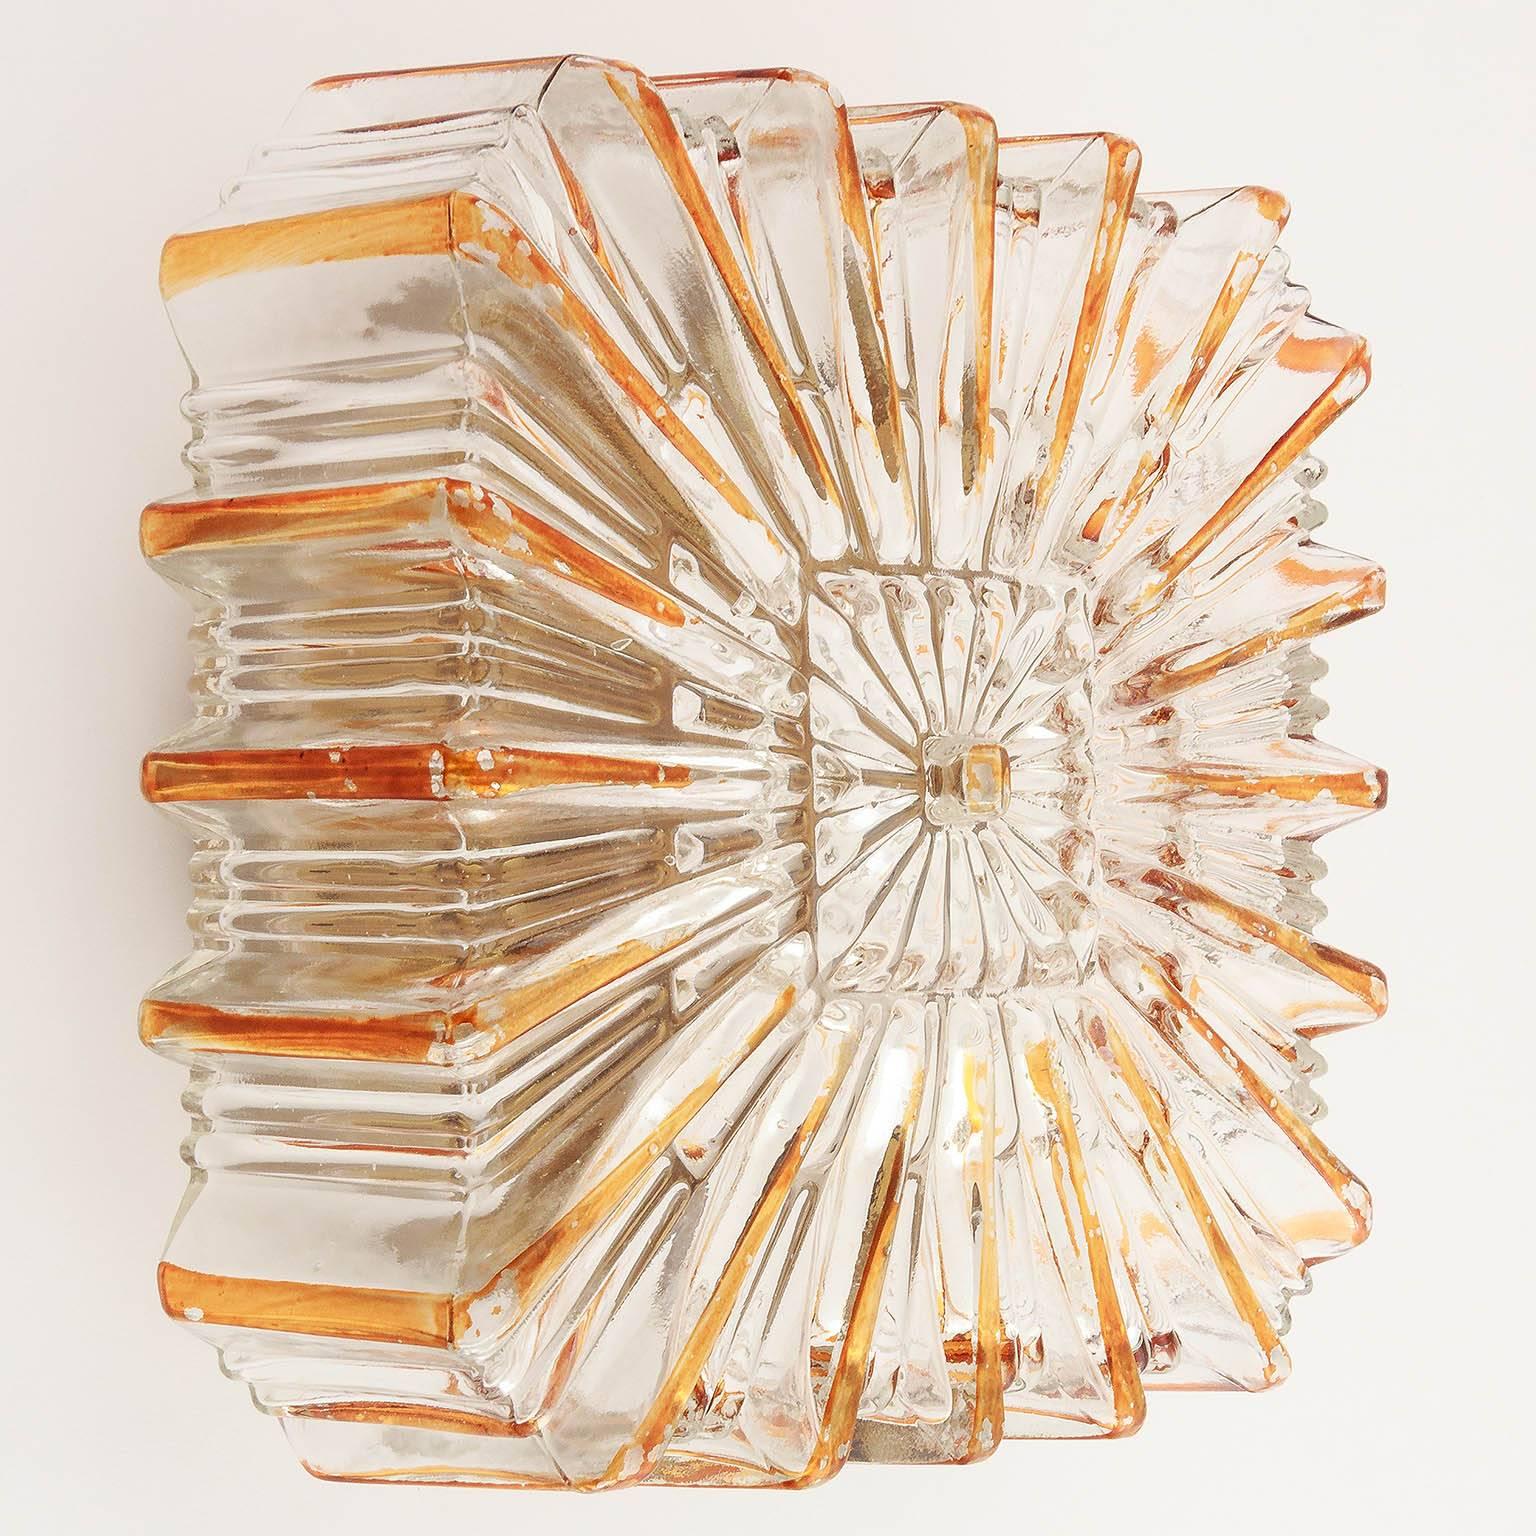 German Pair of Amber Tone Glass Sconces or Flush Mount Light Fixtures, 1960s